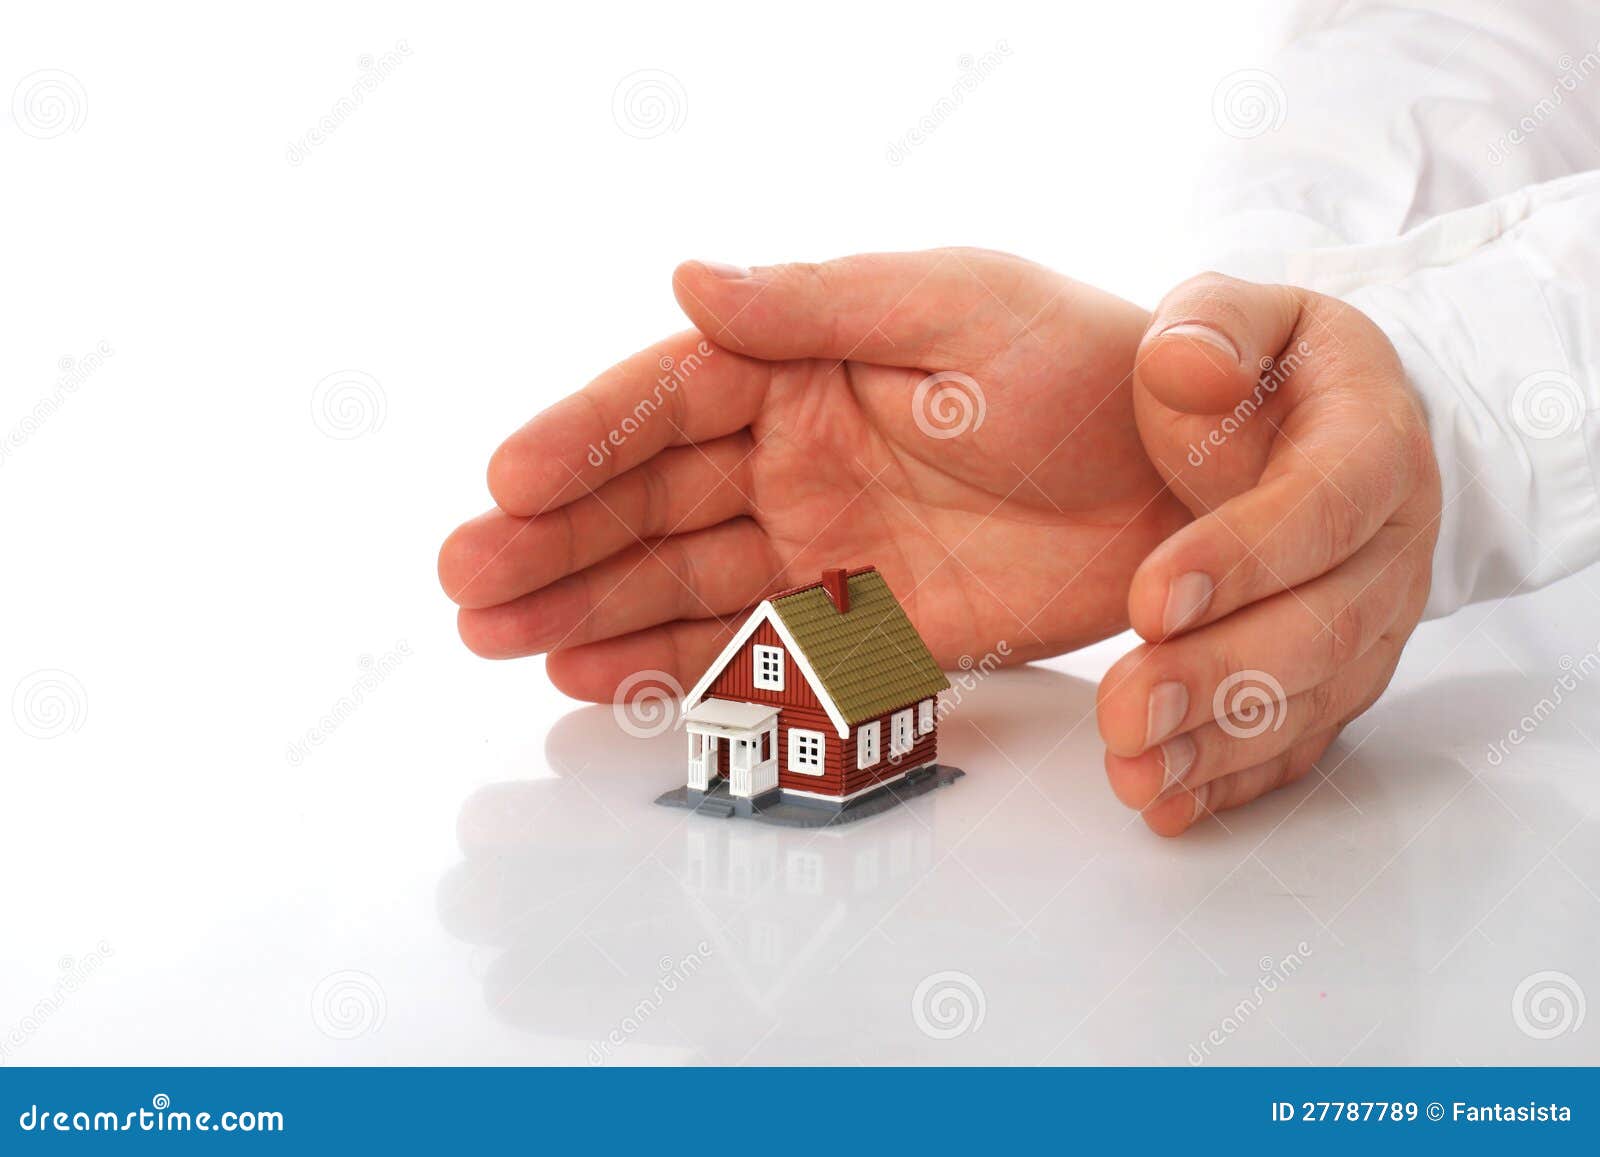 Home insurance. stock image. Image of insurance, background - 27787789